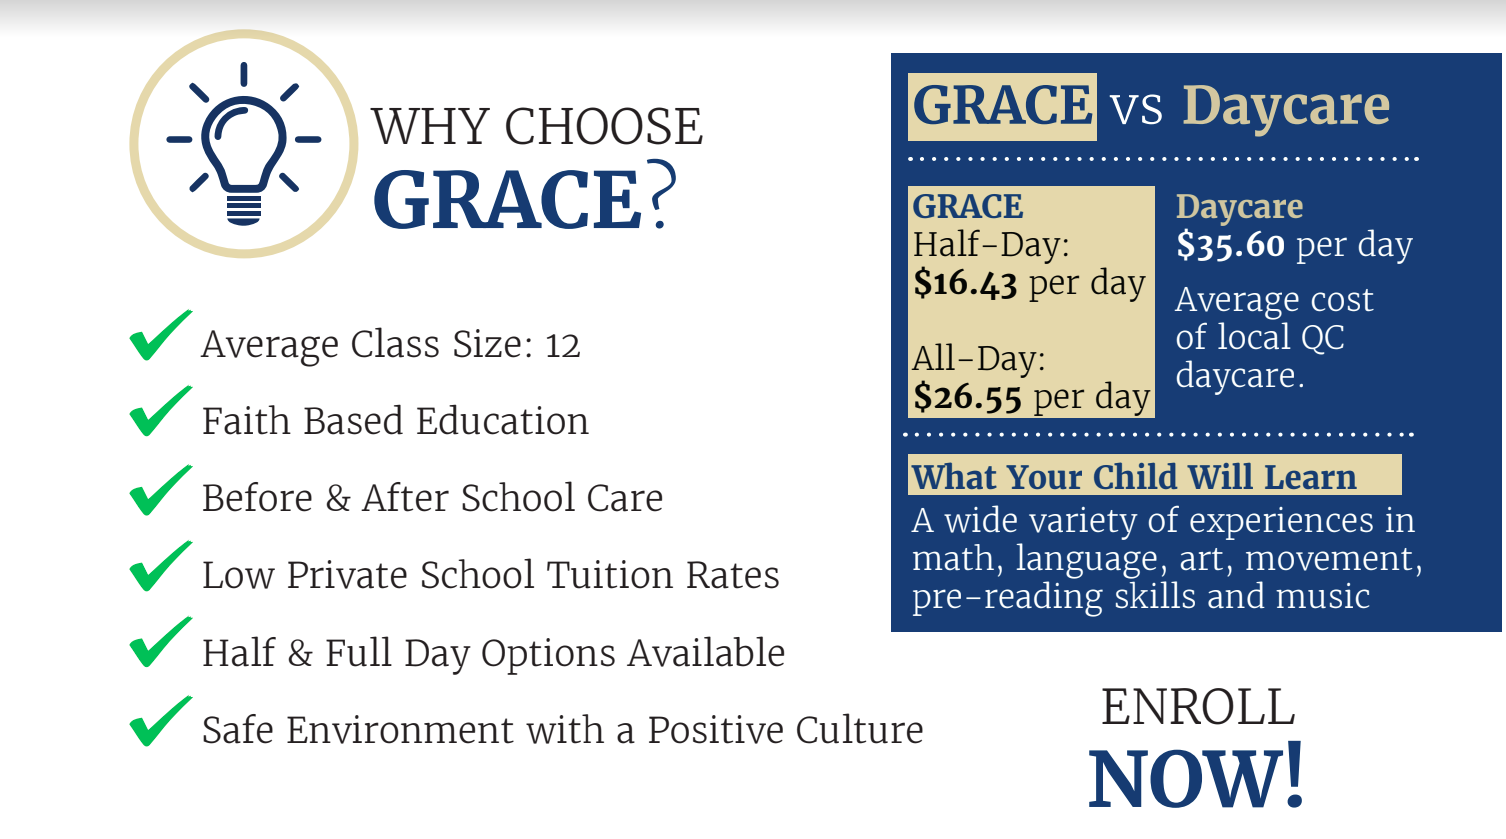 Why Choose Grace graphic